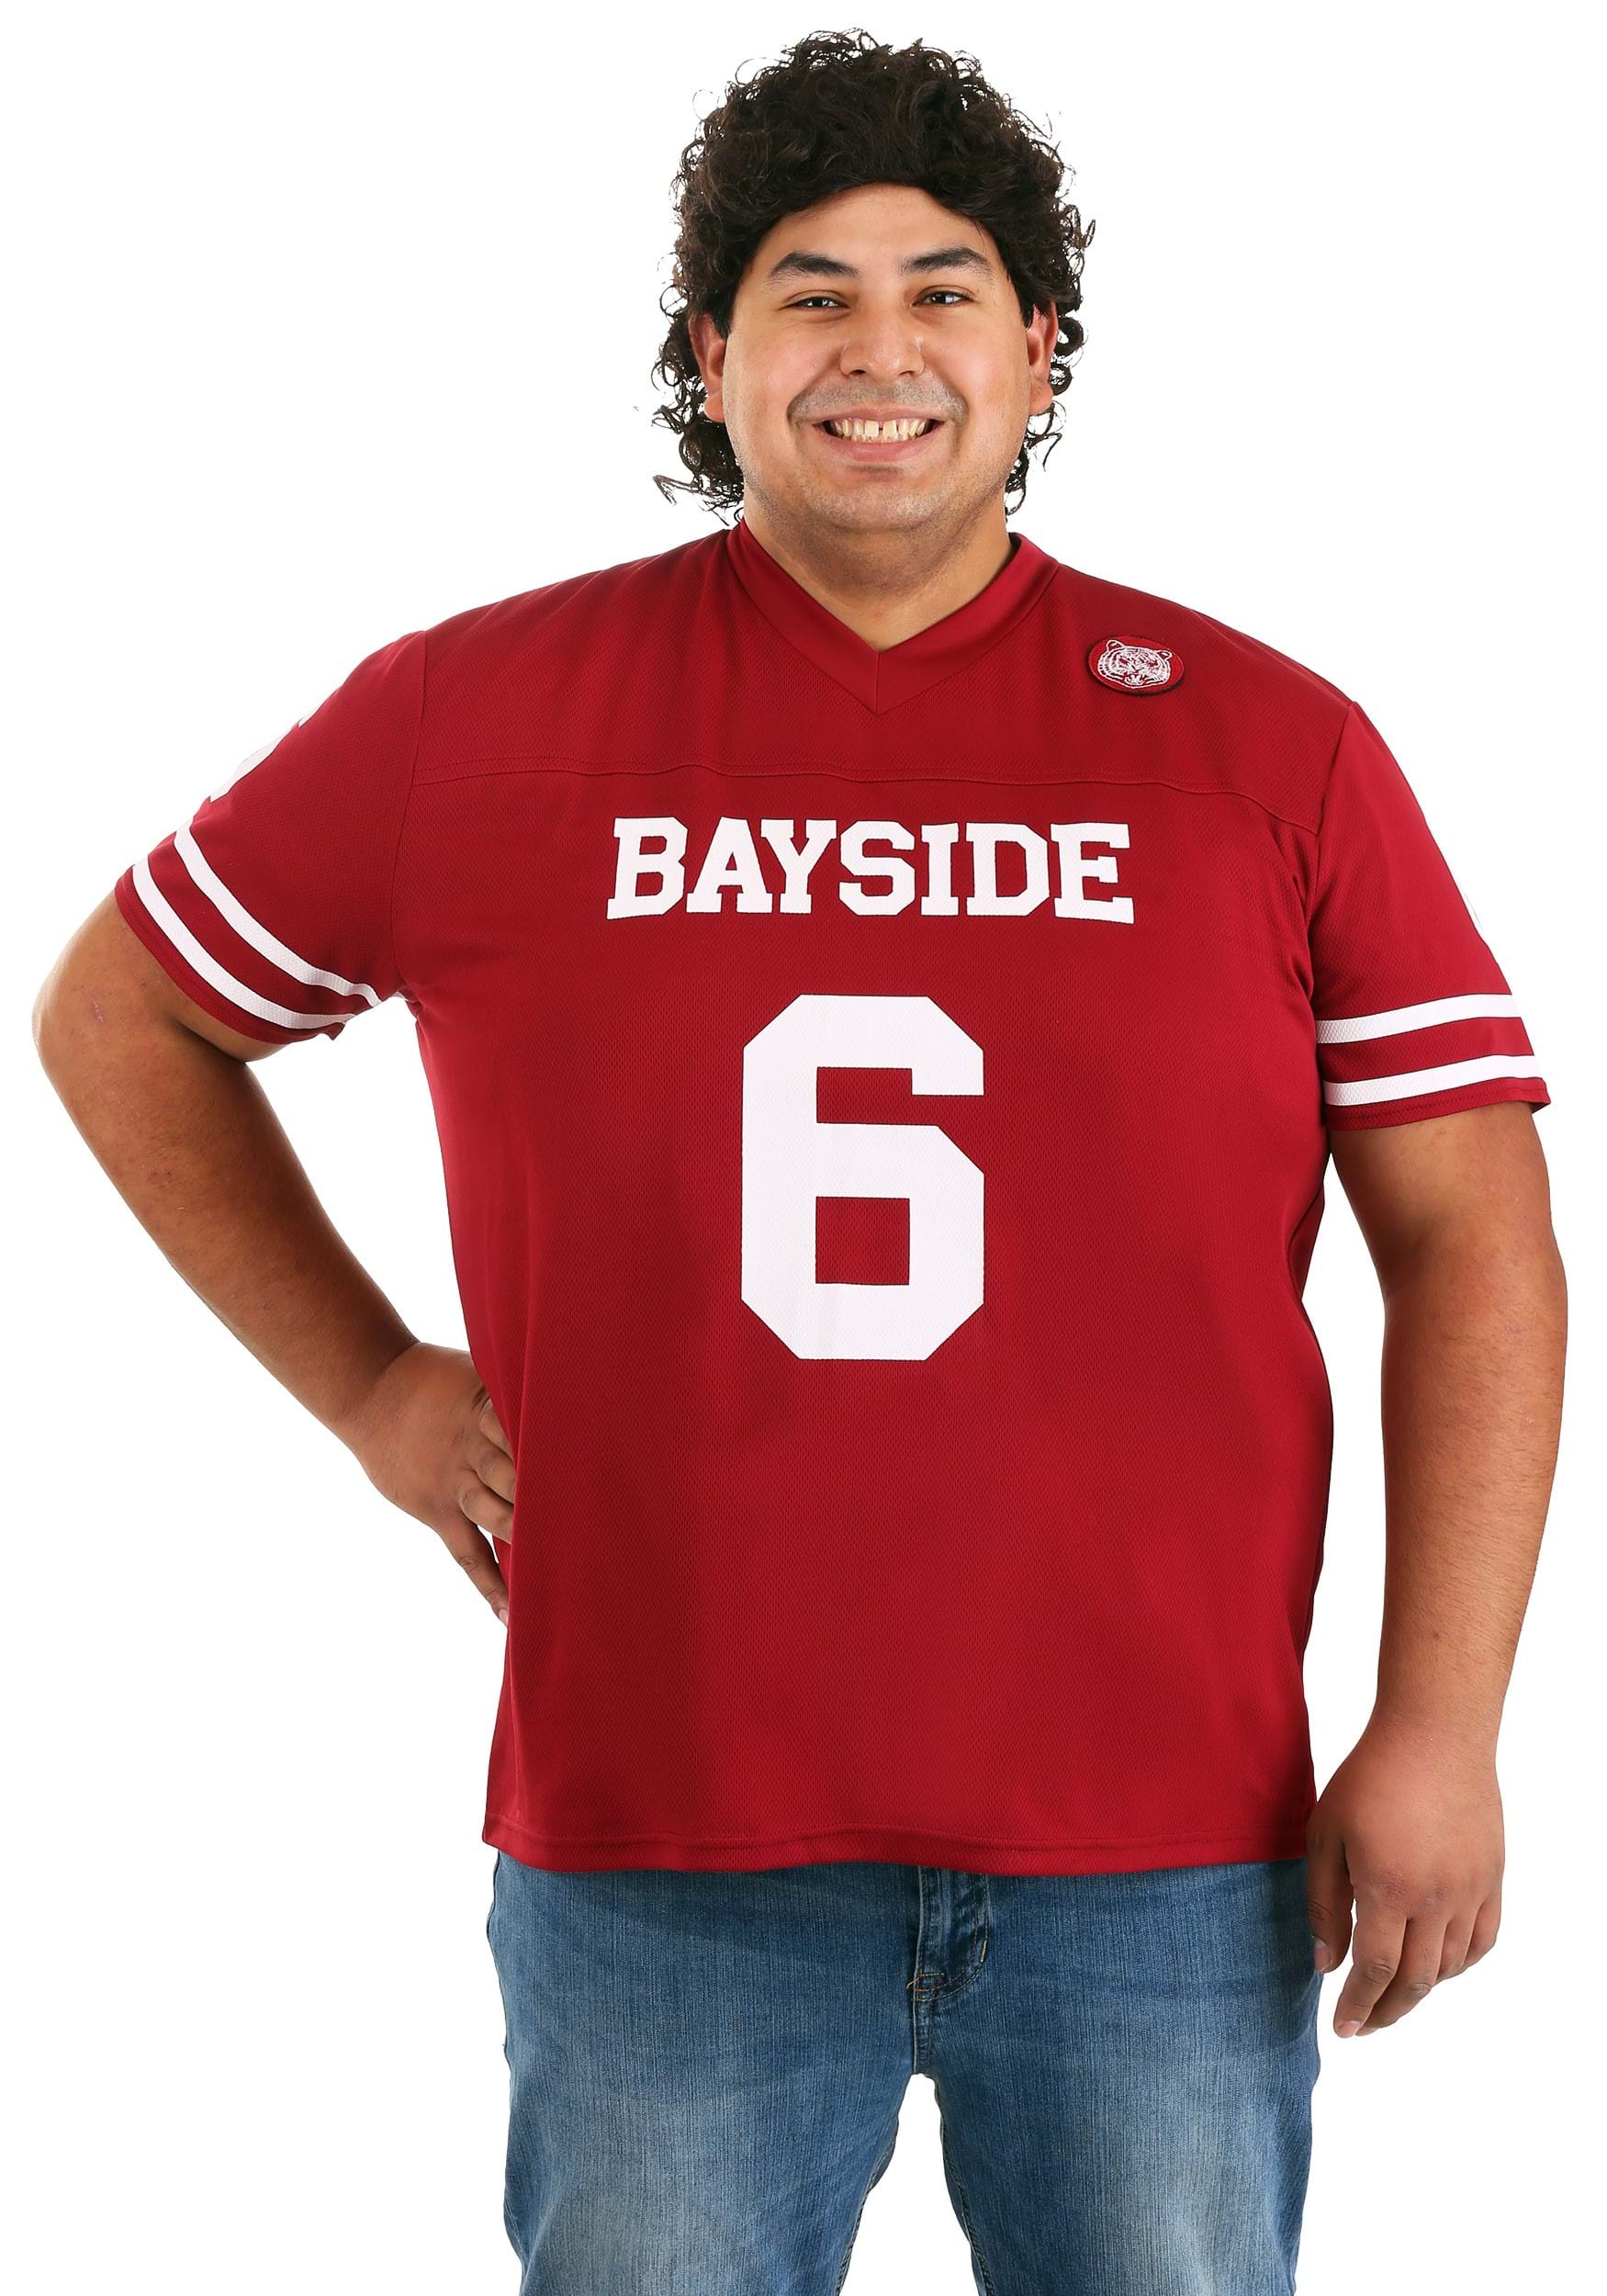 Saved By The Bell A.C. Slater Plus Size Men's Fancy Dress Costume